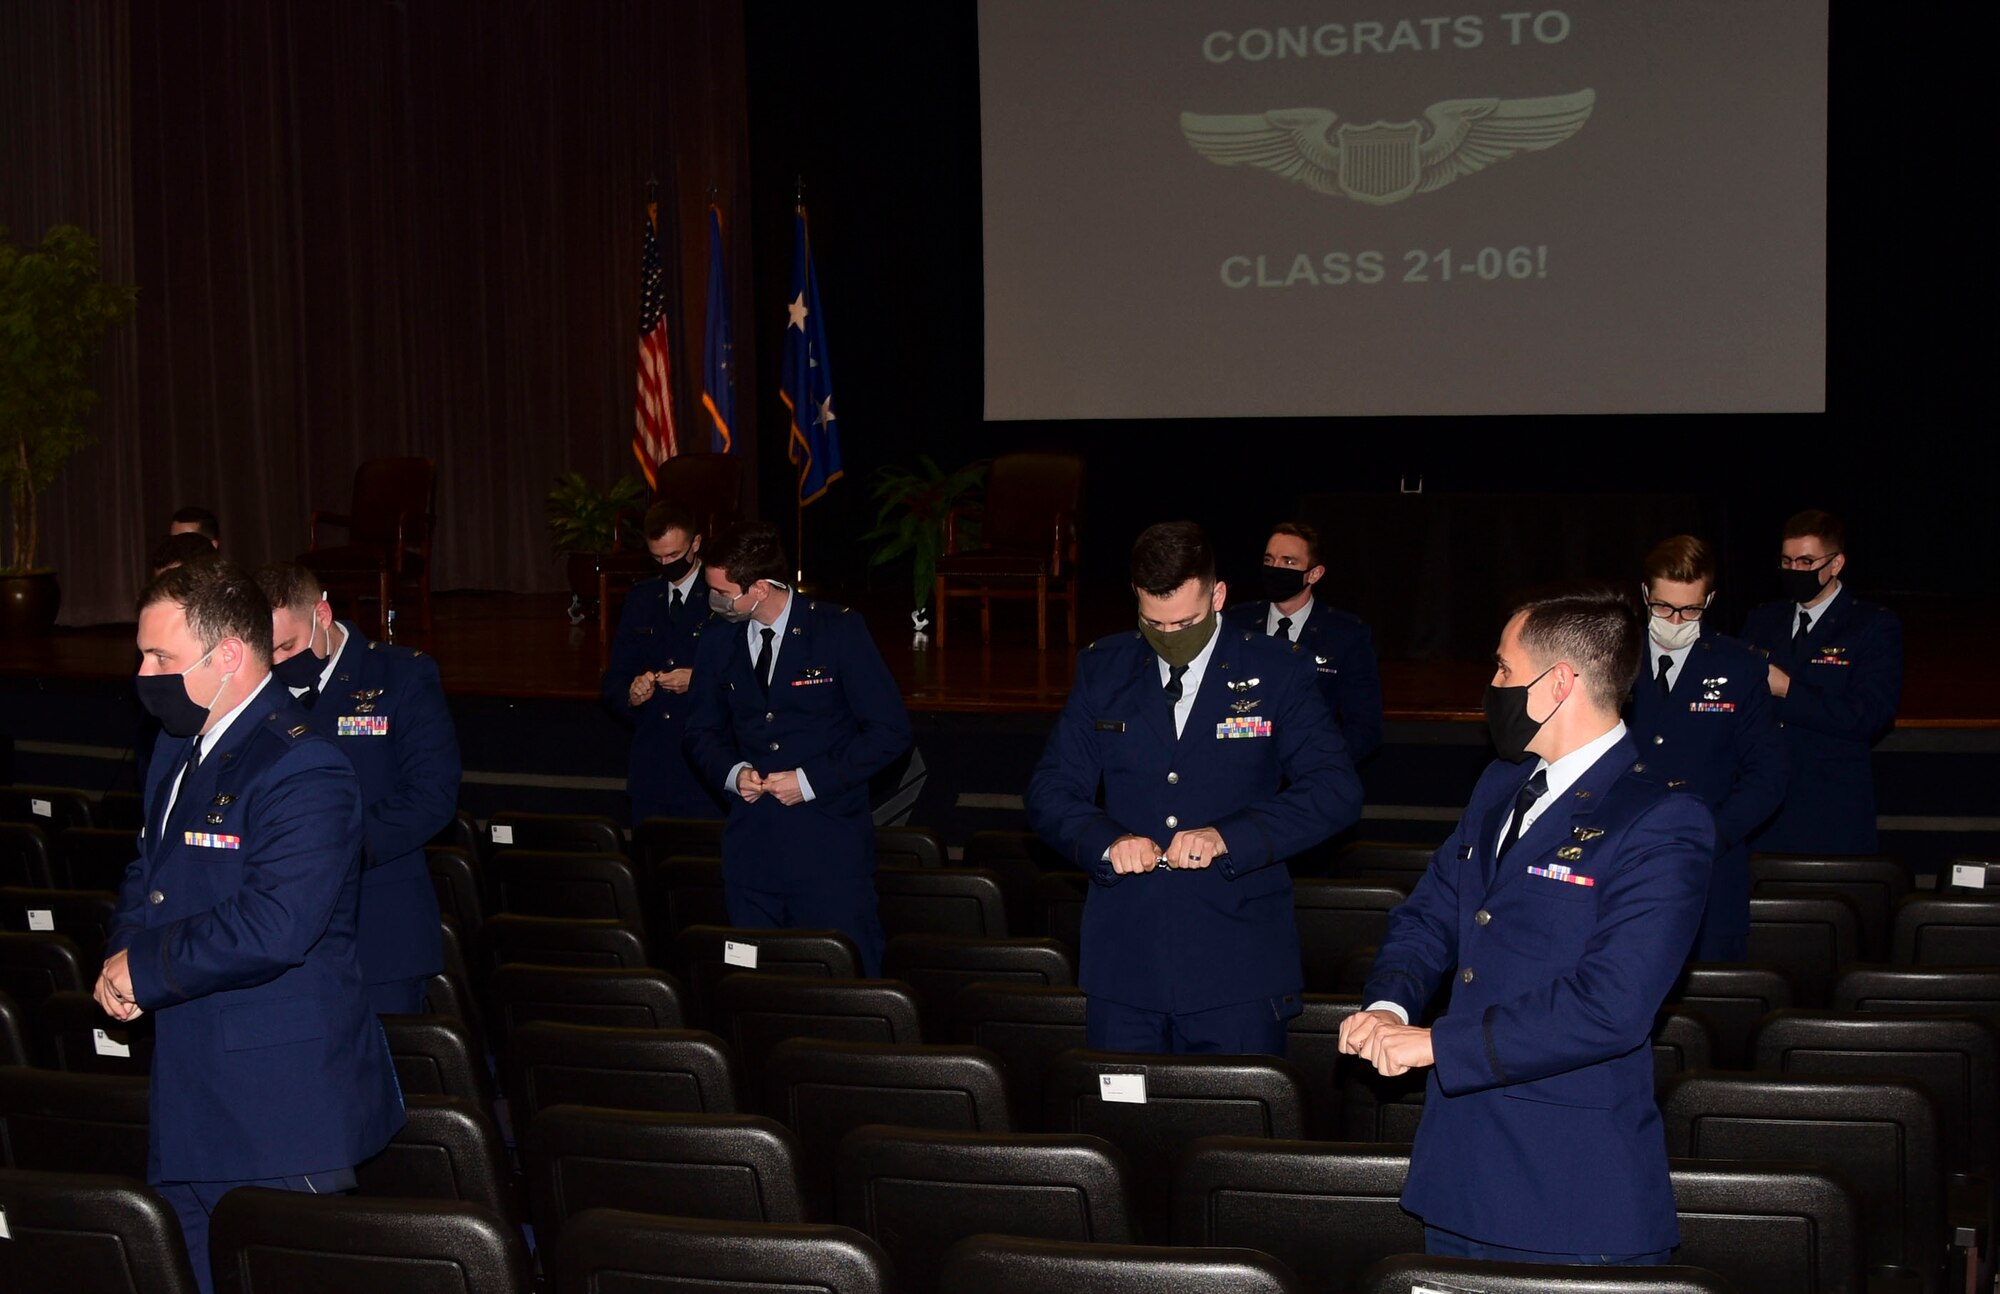 Graduates from the Specialized Undergraduate Pilot Training class 21-06, pilots break their first pair of wings, during their graduation ceremony, Feb. 26, 2021, on Columbus Air Force Base, Miss. Per tradition, pilots will keep one half of the broken wings and give the second half to a loved one. (U.S. Air Force photo by Melissa Duncan-Doublin)